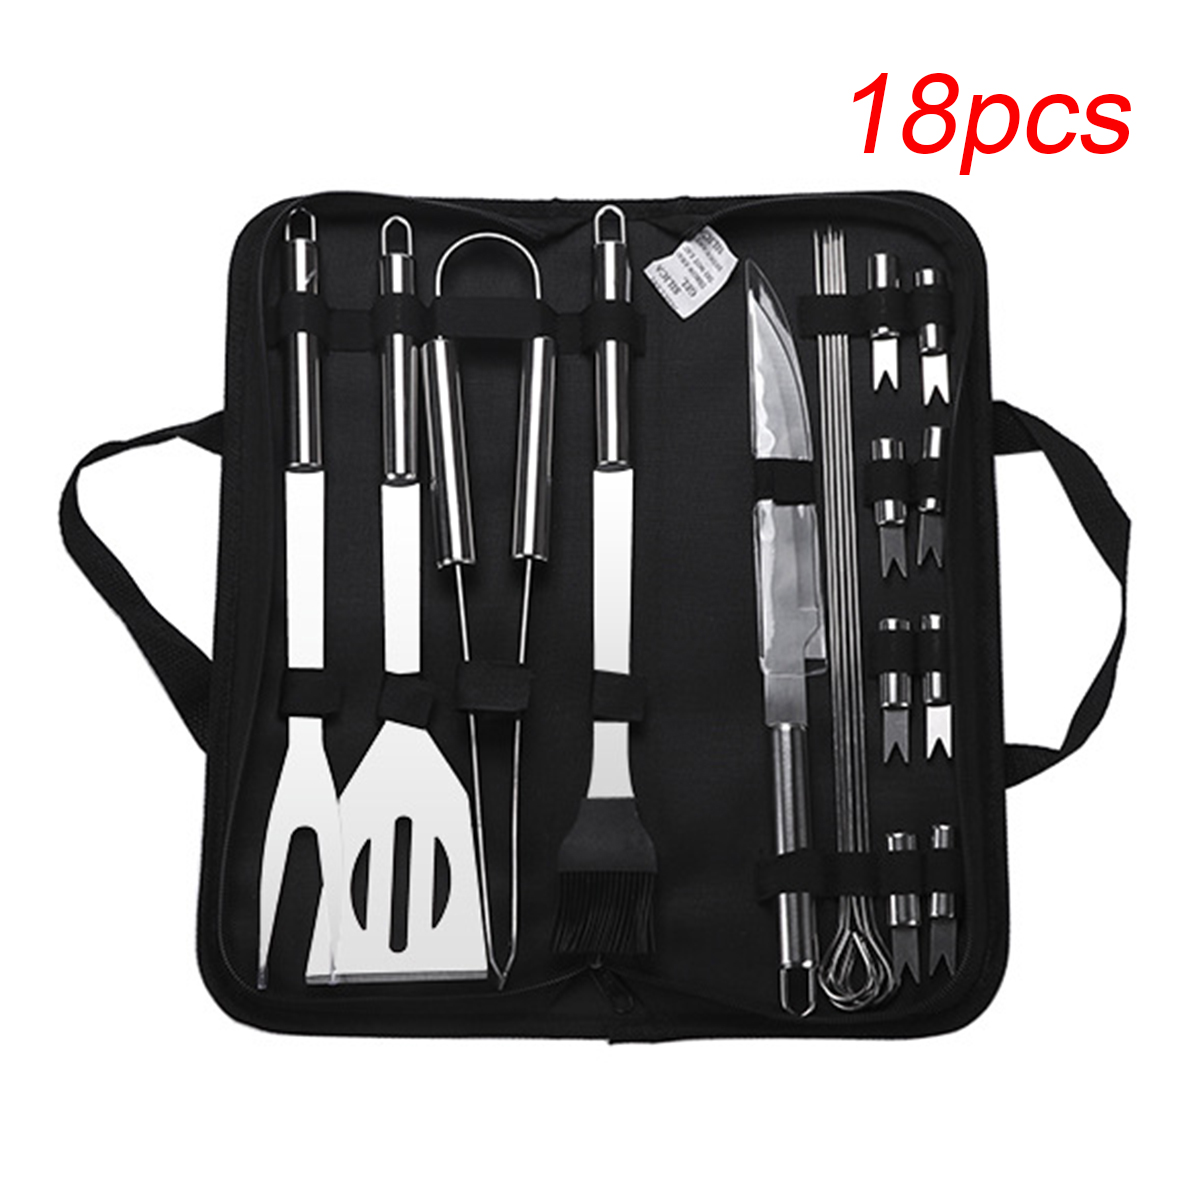 Stainless-Steel-BBQ-Tools-Set-Barbecue-Grilling-Utensil-Accessories-Camping-Outdoor-Cooking-1676473-3